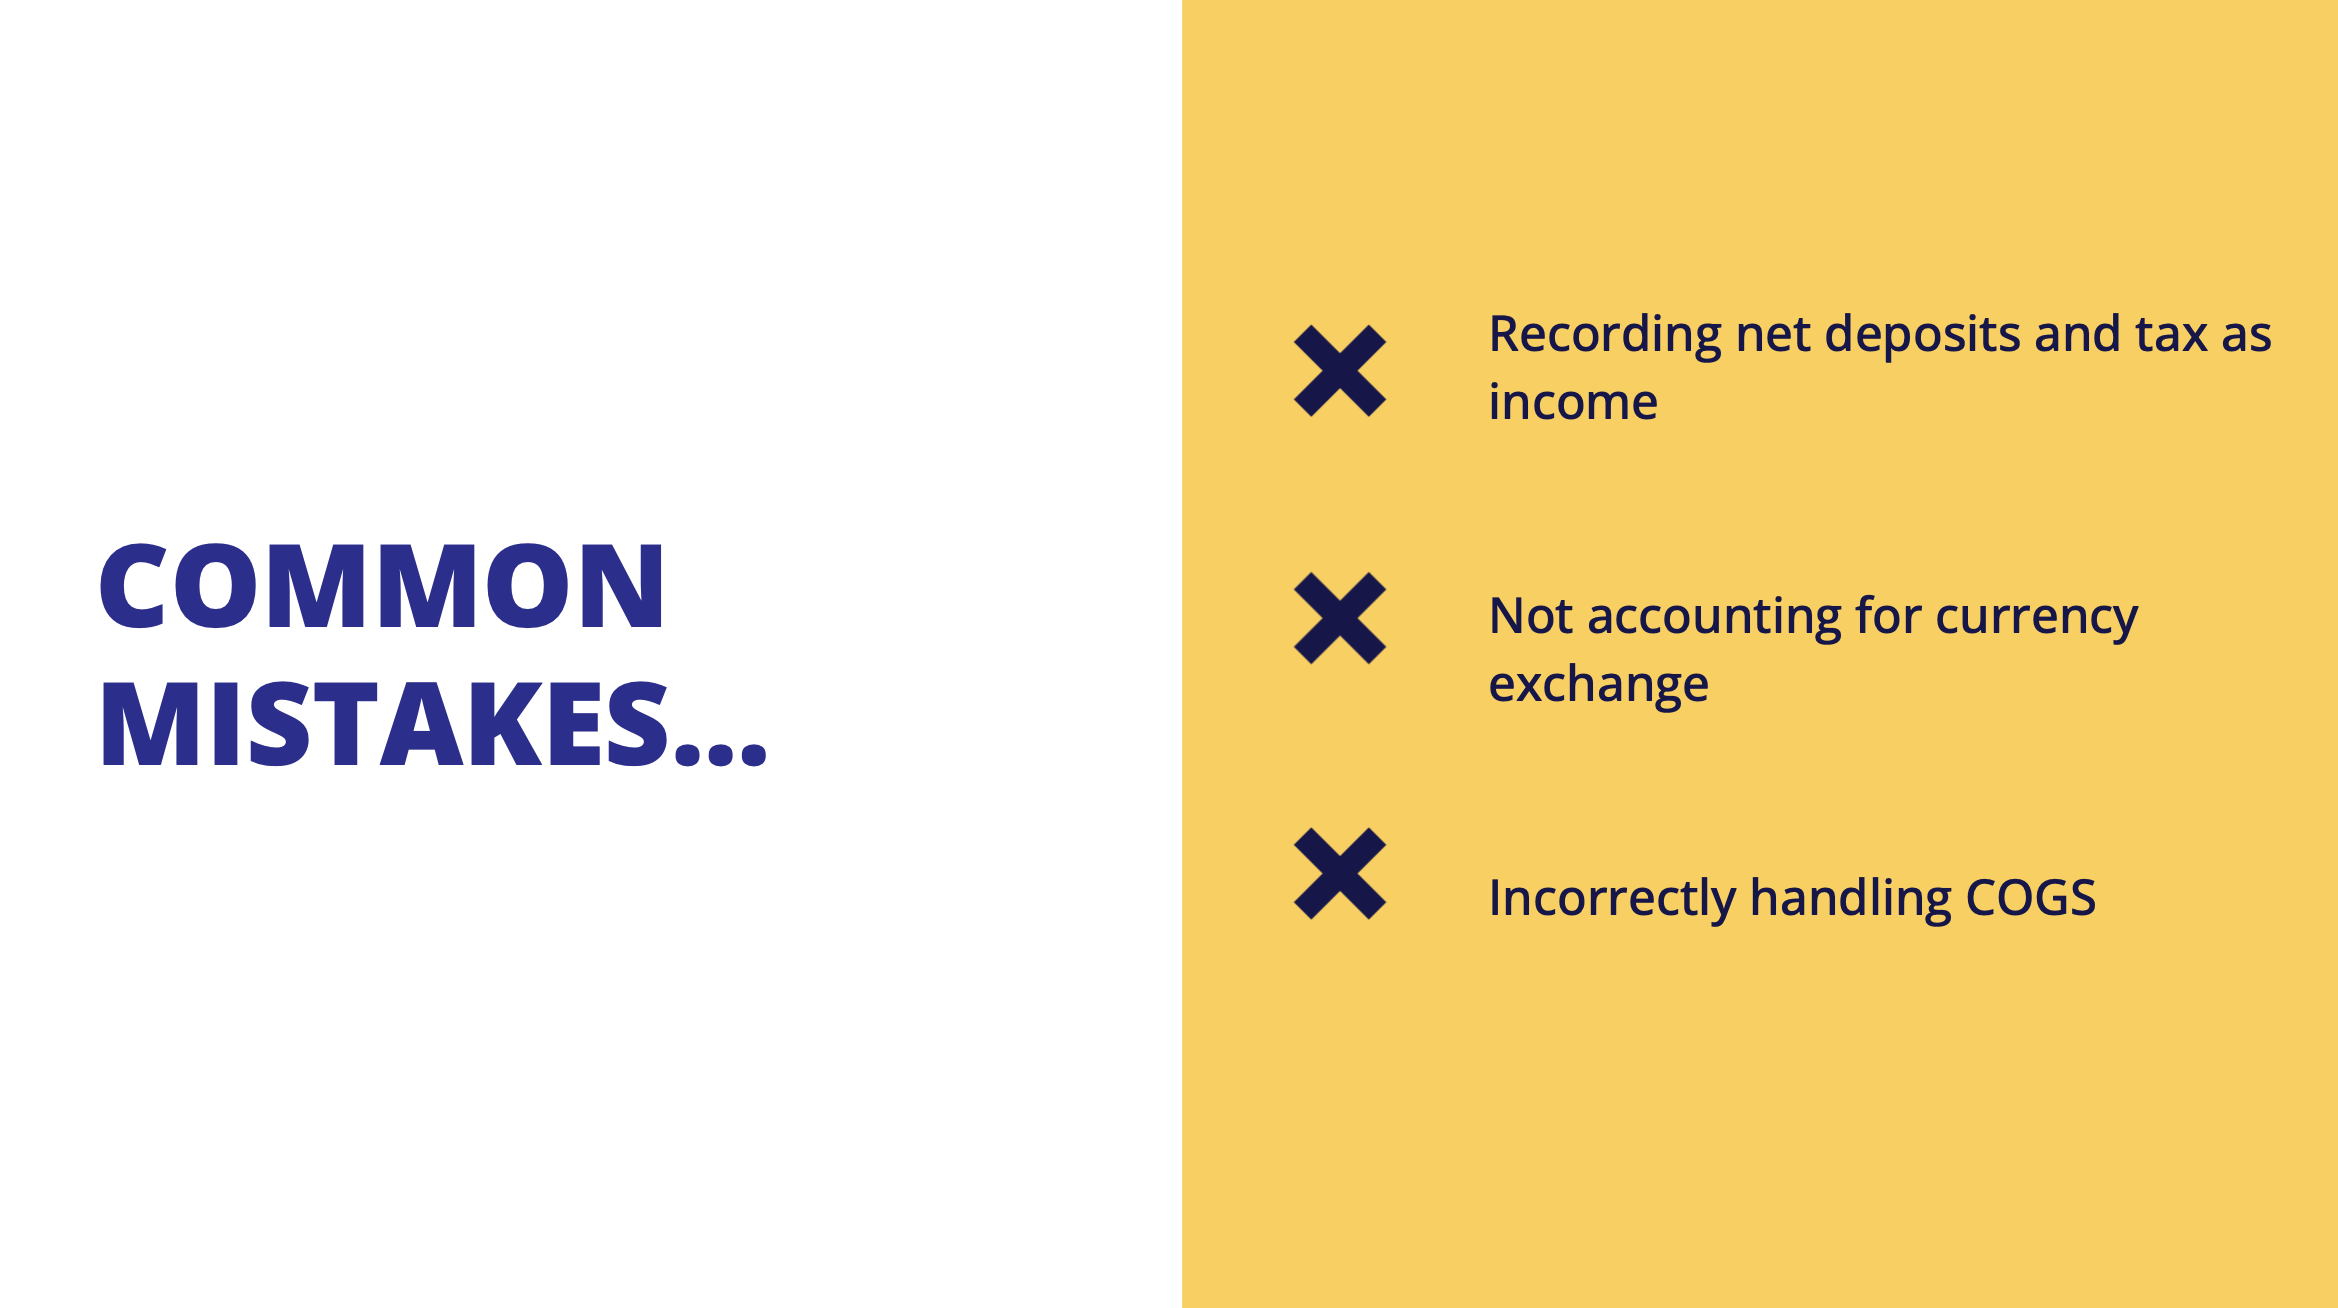 Common mistakes with ecommerce accounting include recording net deposits as income, recording sales tax as income, and only accounting for COGS when they’re purchased.